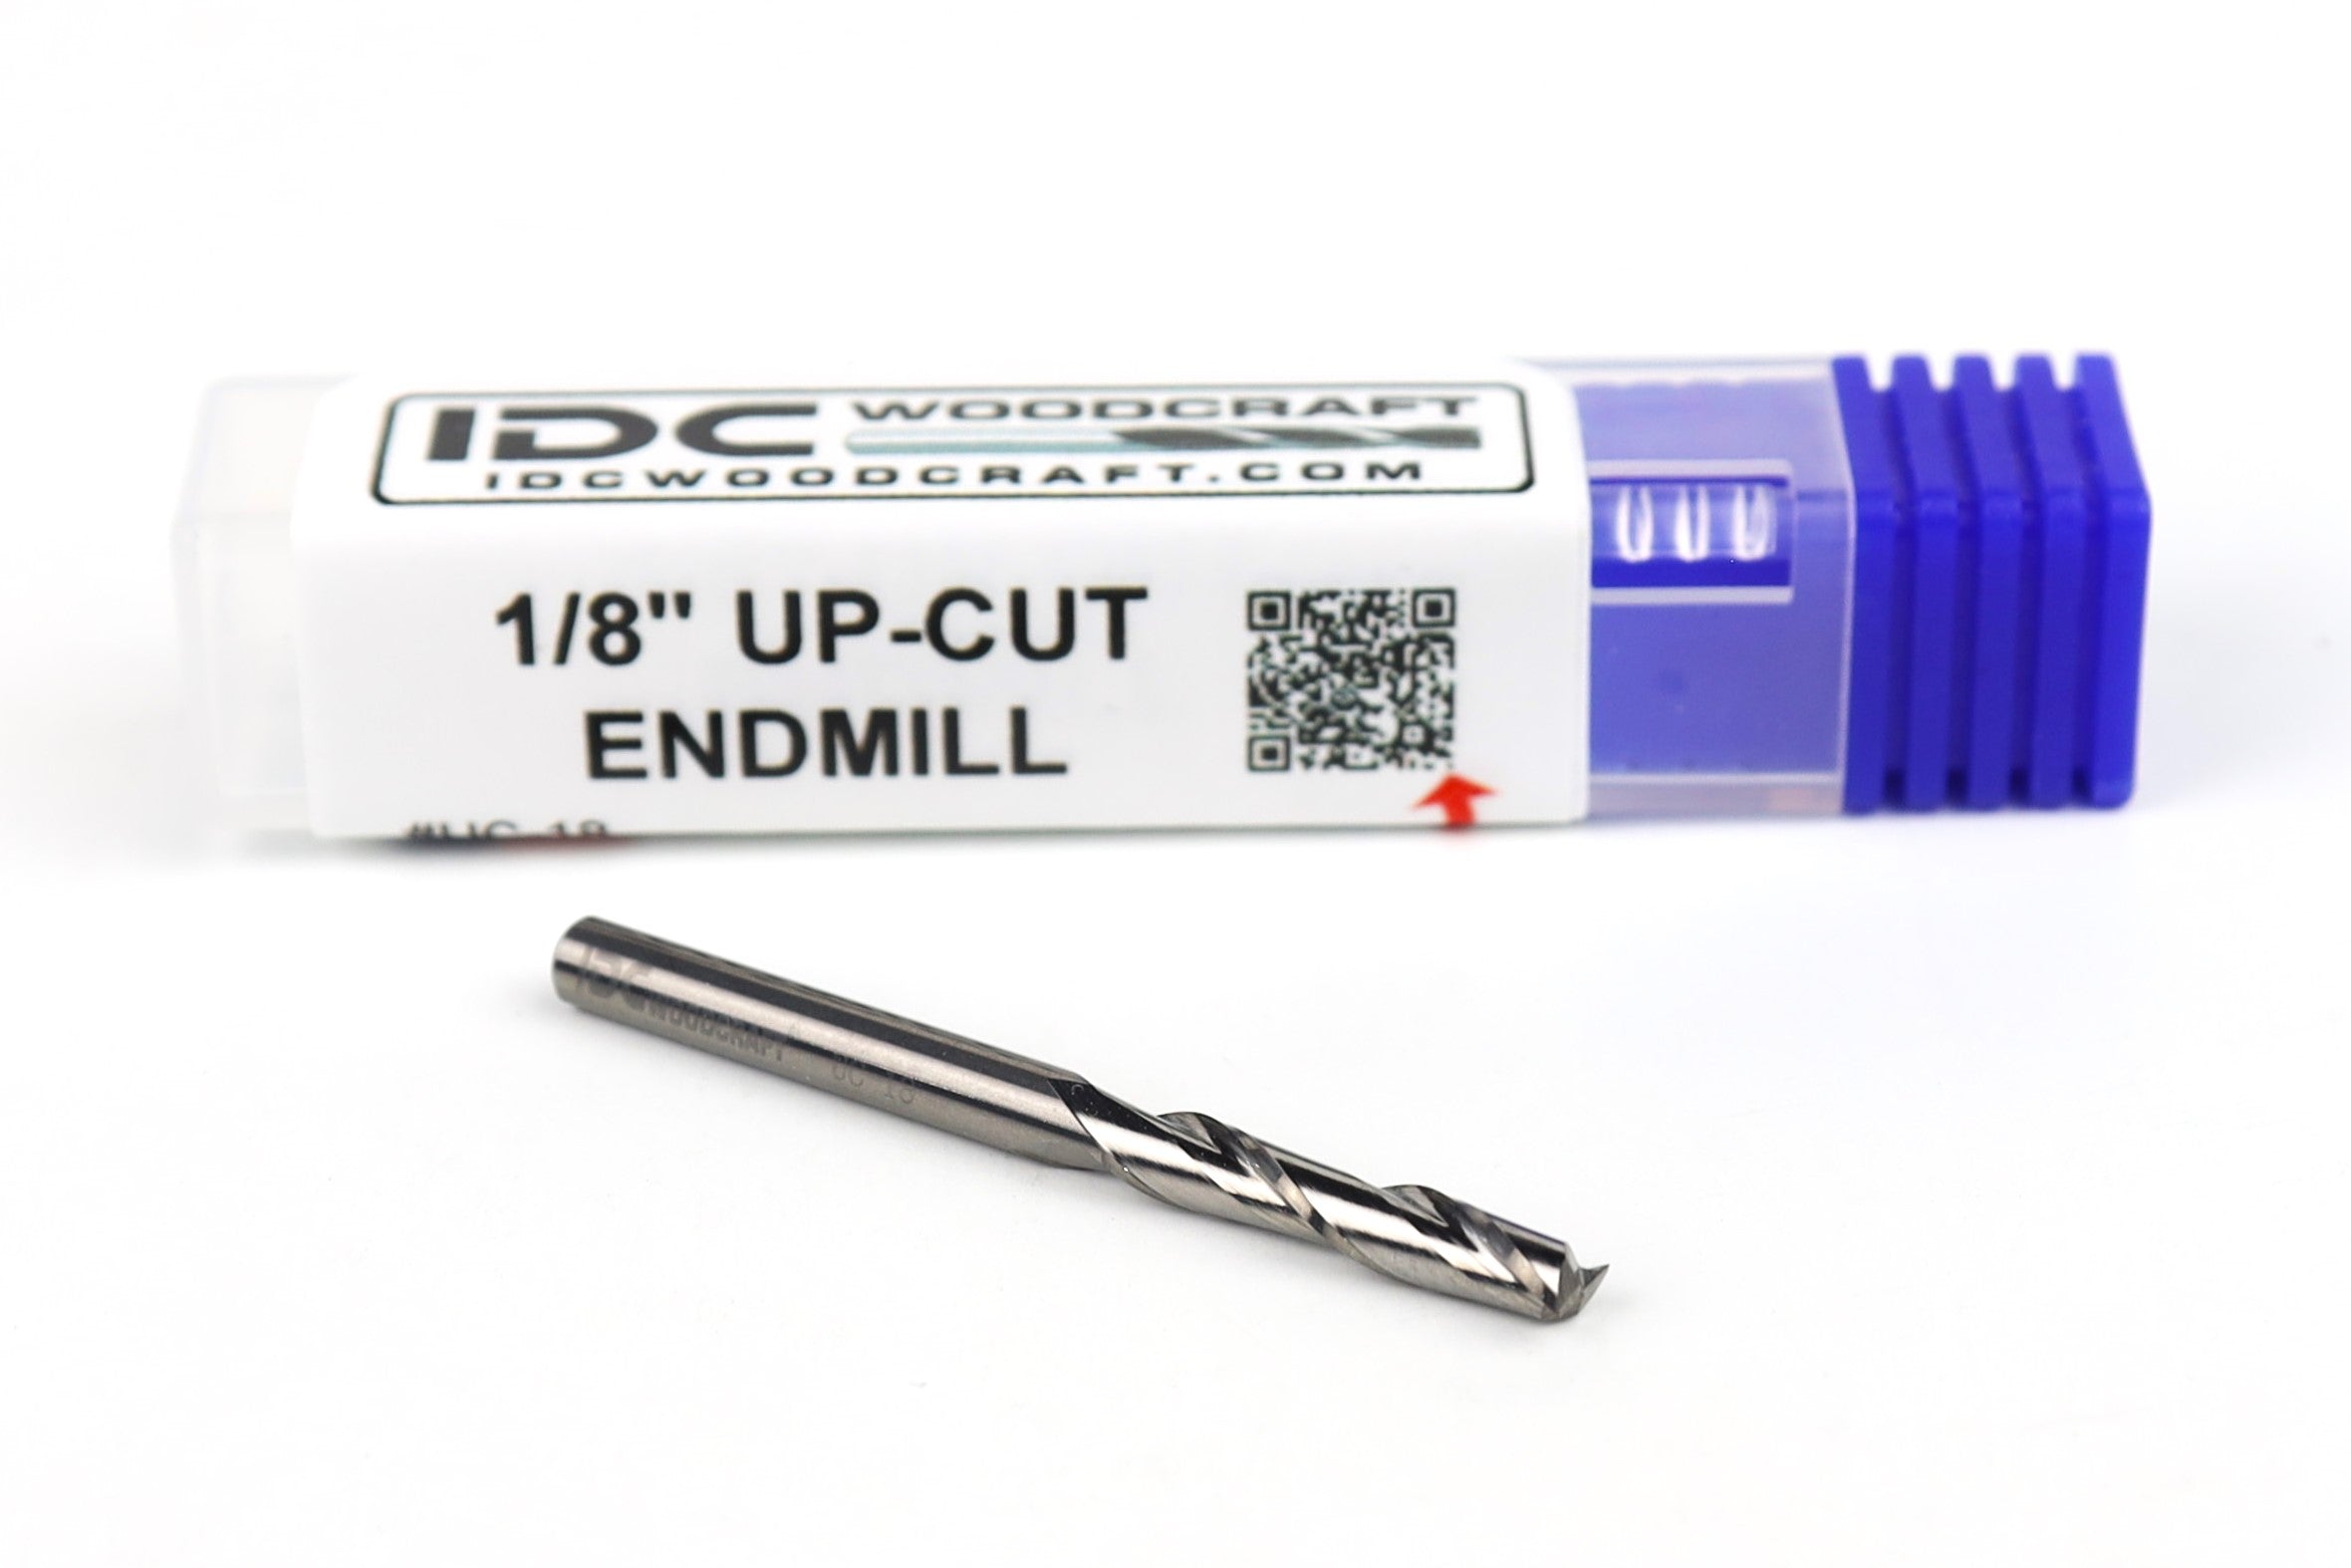 1/8" Up-Cut Endmill Bit (Drilling Capable) For CNC Routers (set of 2)